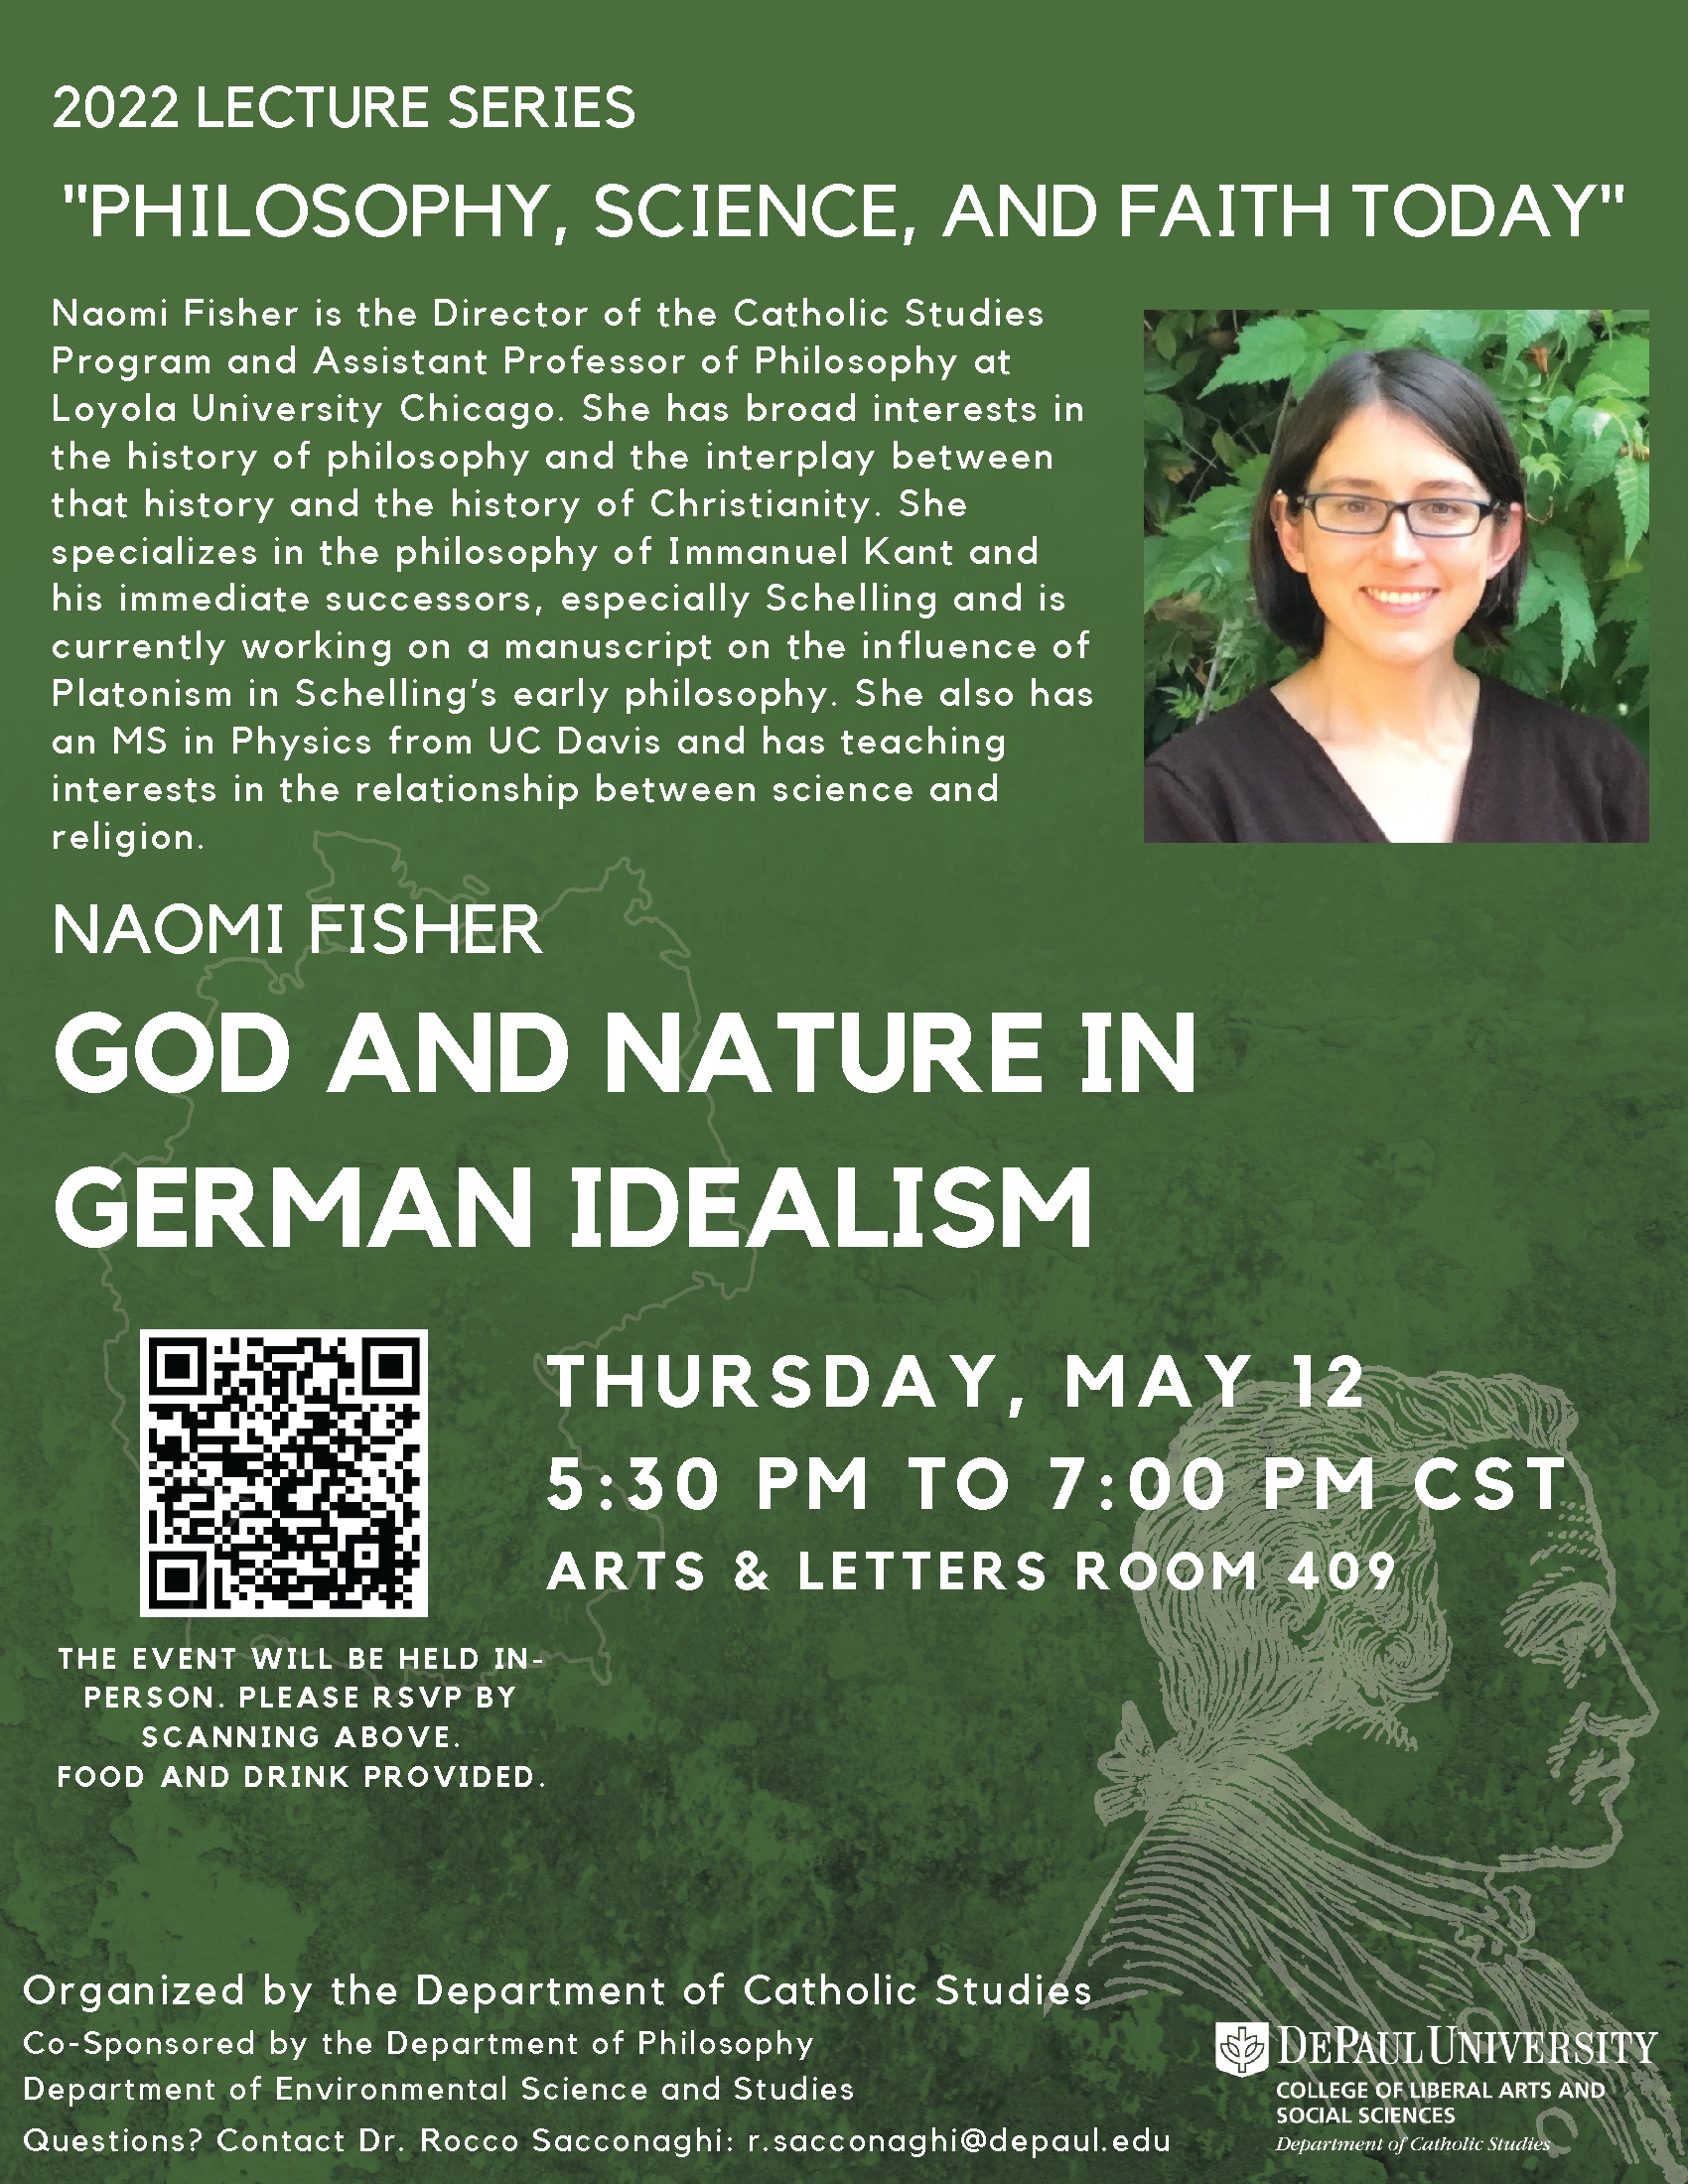 God and Nature in German Idealism